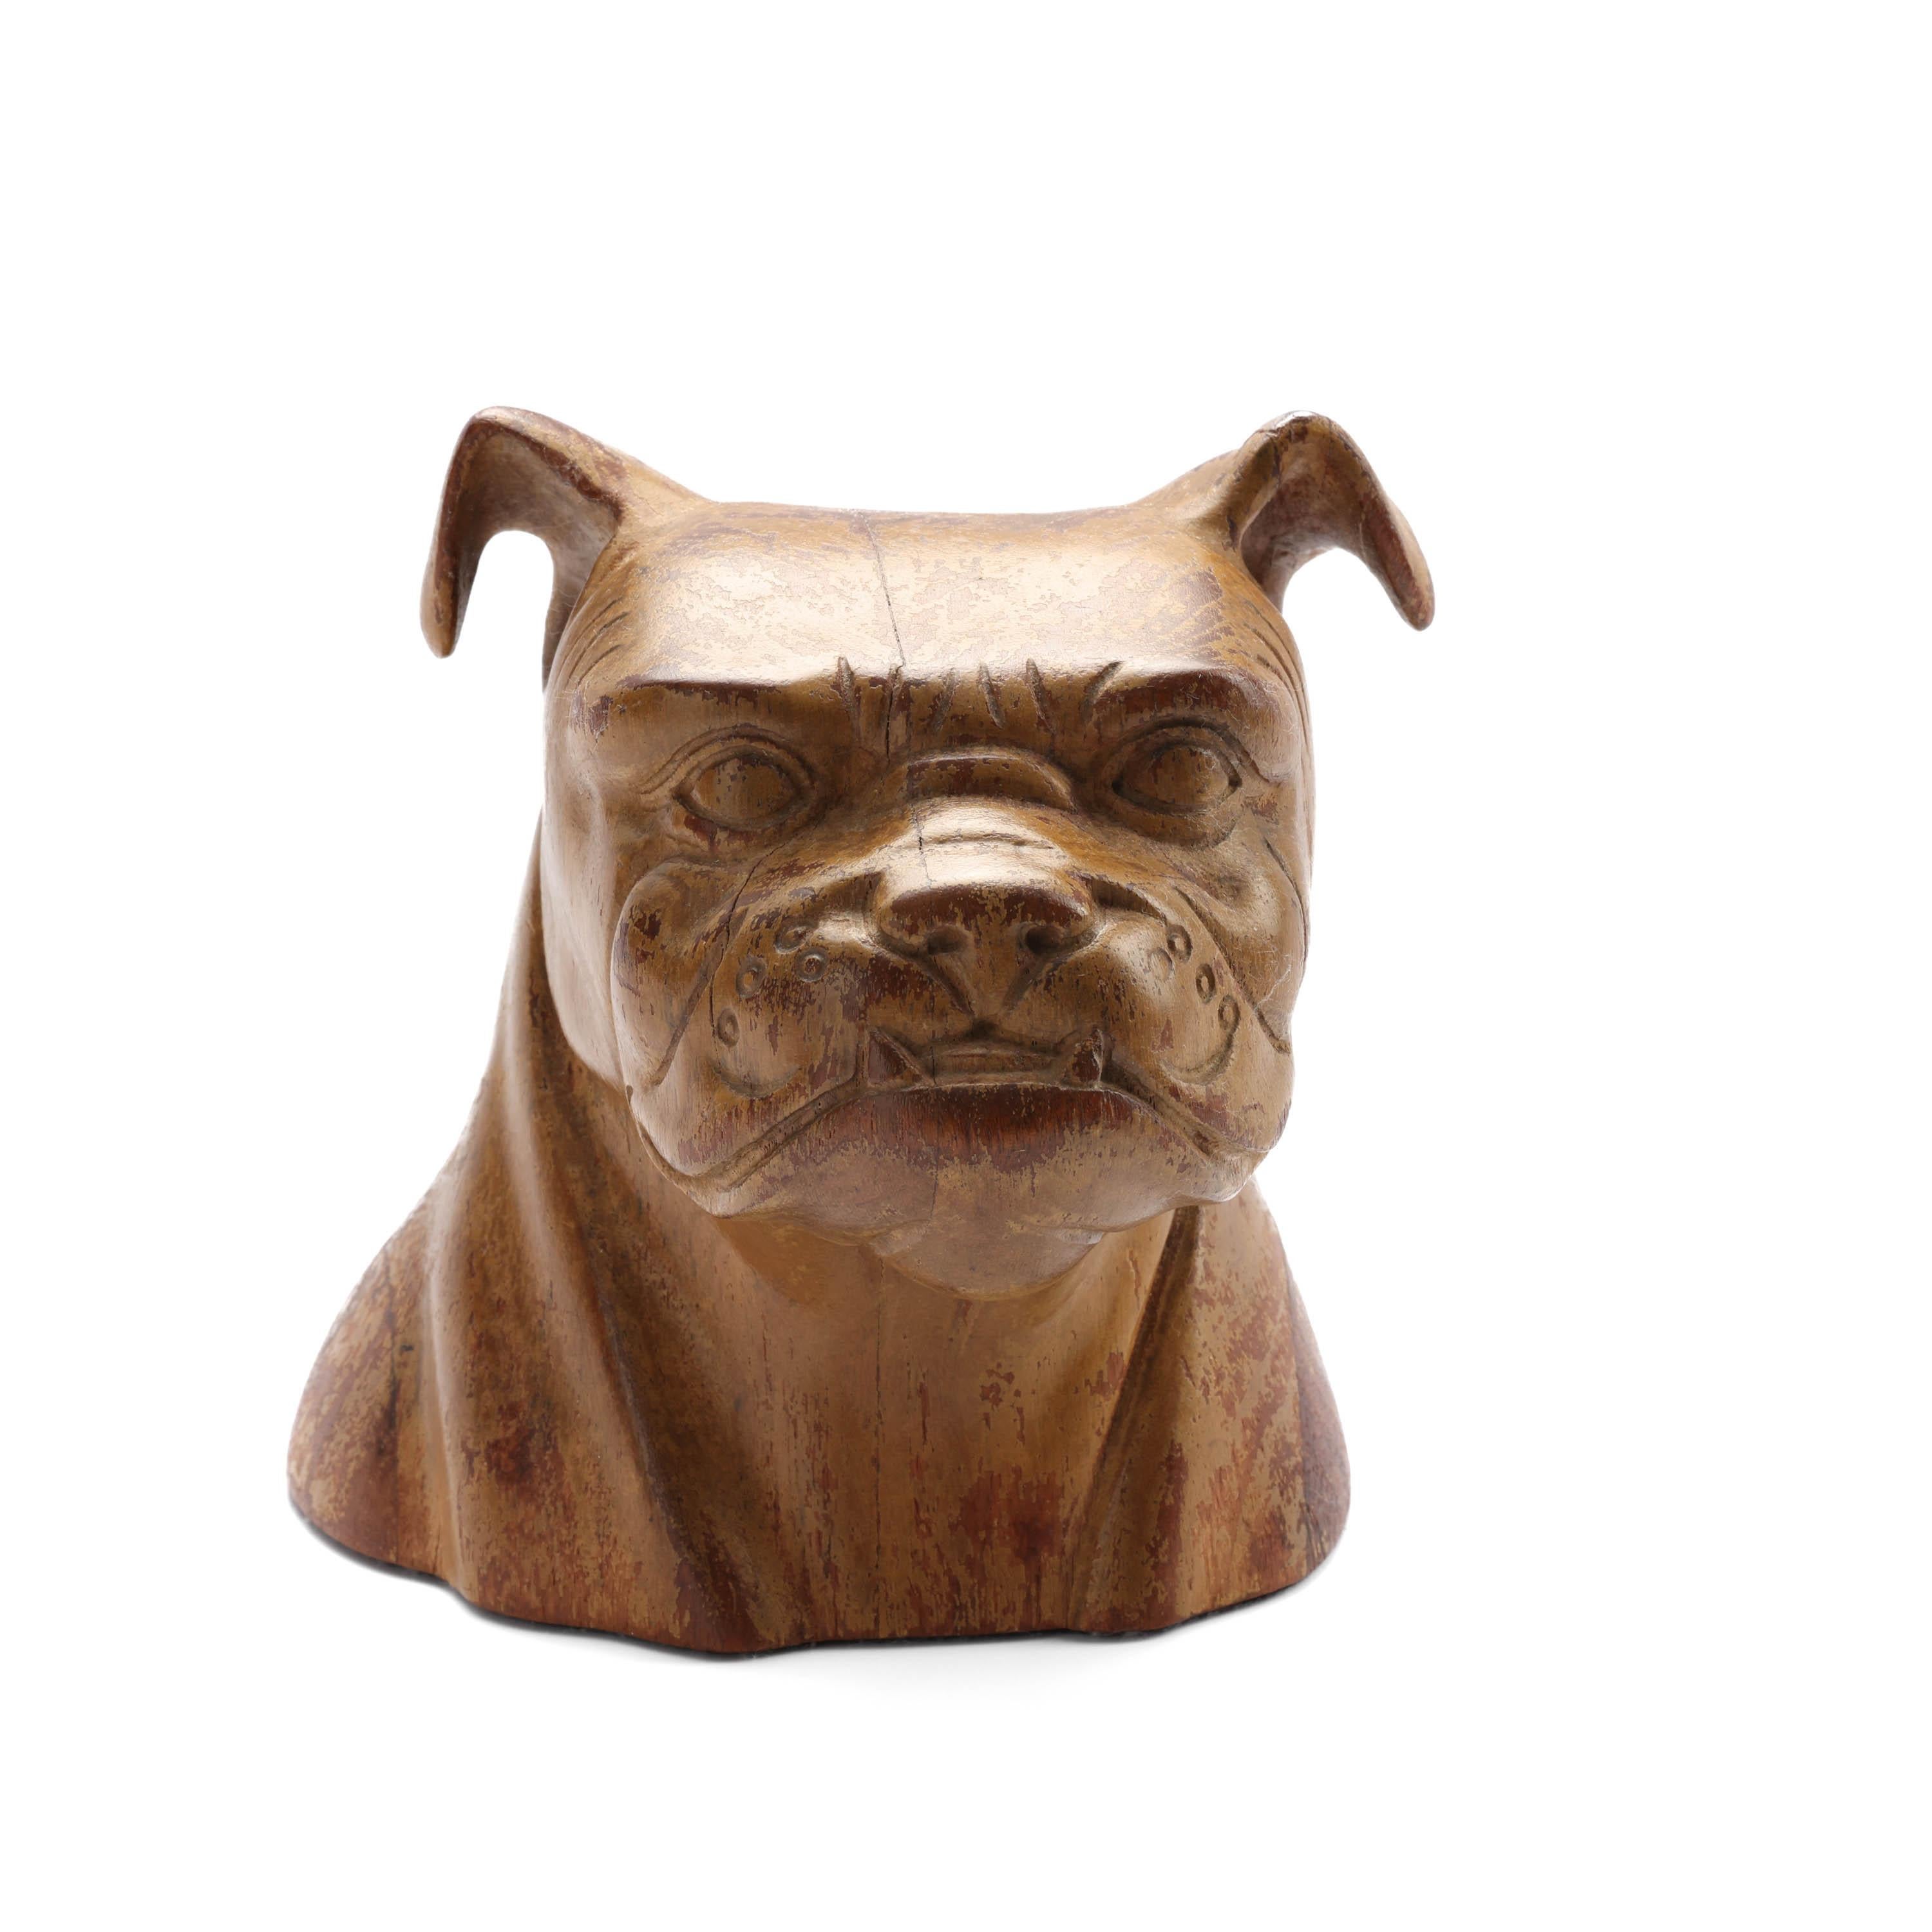 Dog breed sculptures are bountiful. But hand-carved French Bulldog, English Bulldog, or Boxer sculptures, not so much. This is a rare and beautiful find.

Finely, expertly, and artistically carved in wood and then varnished, possibly over a light